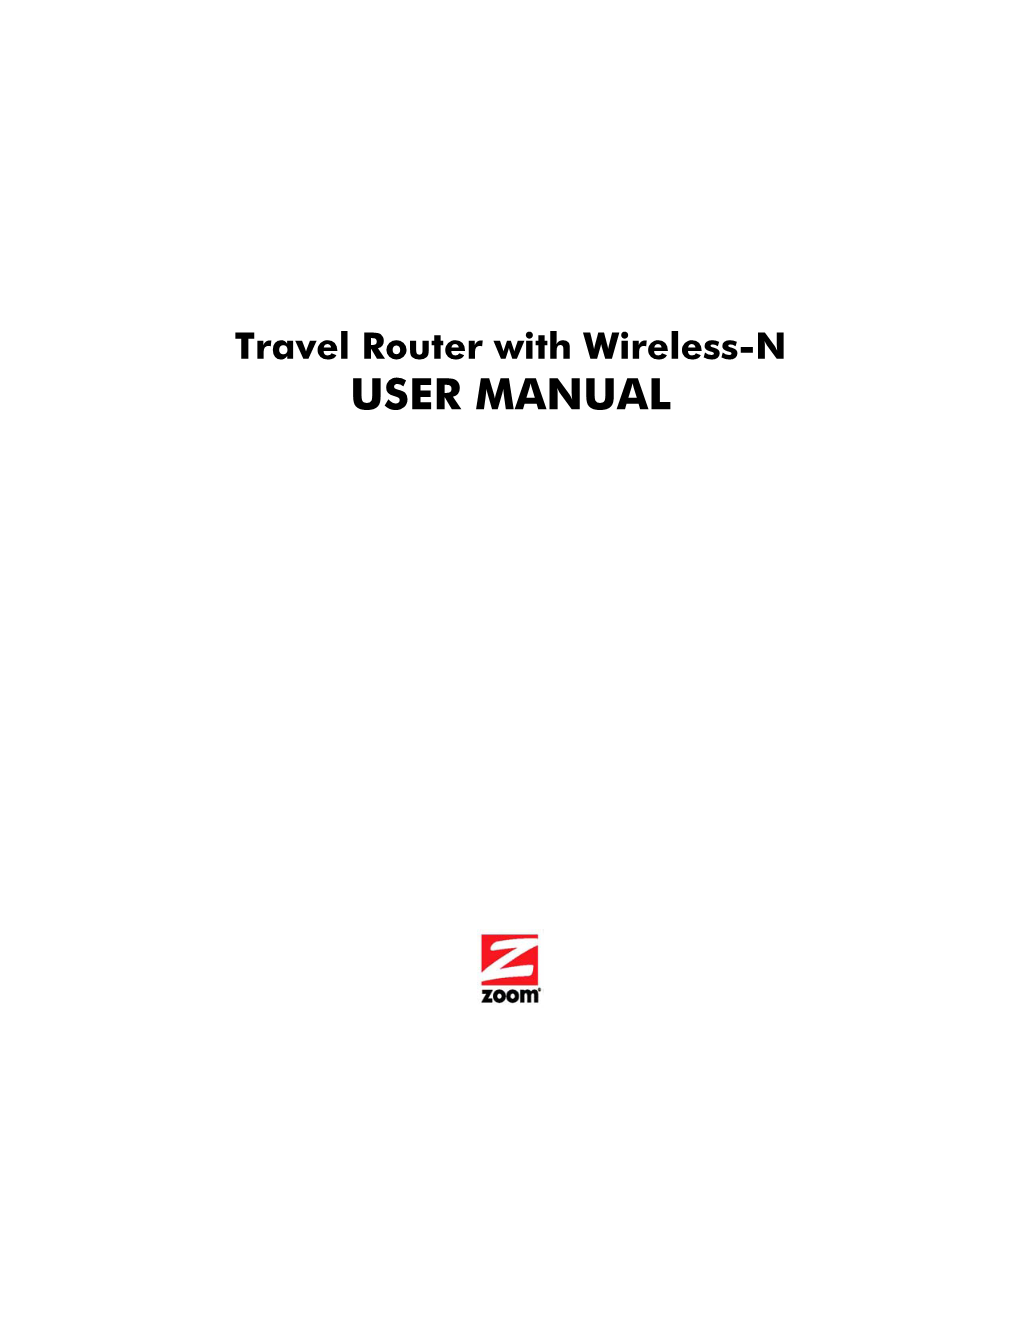 User Guide of HSPA Wireless WAN Mobile Broadband Router